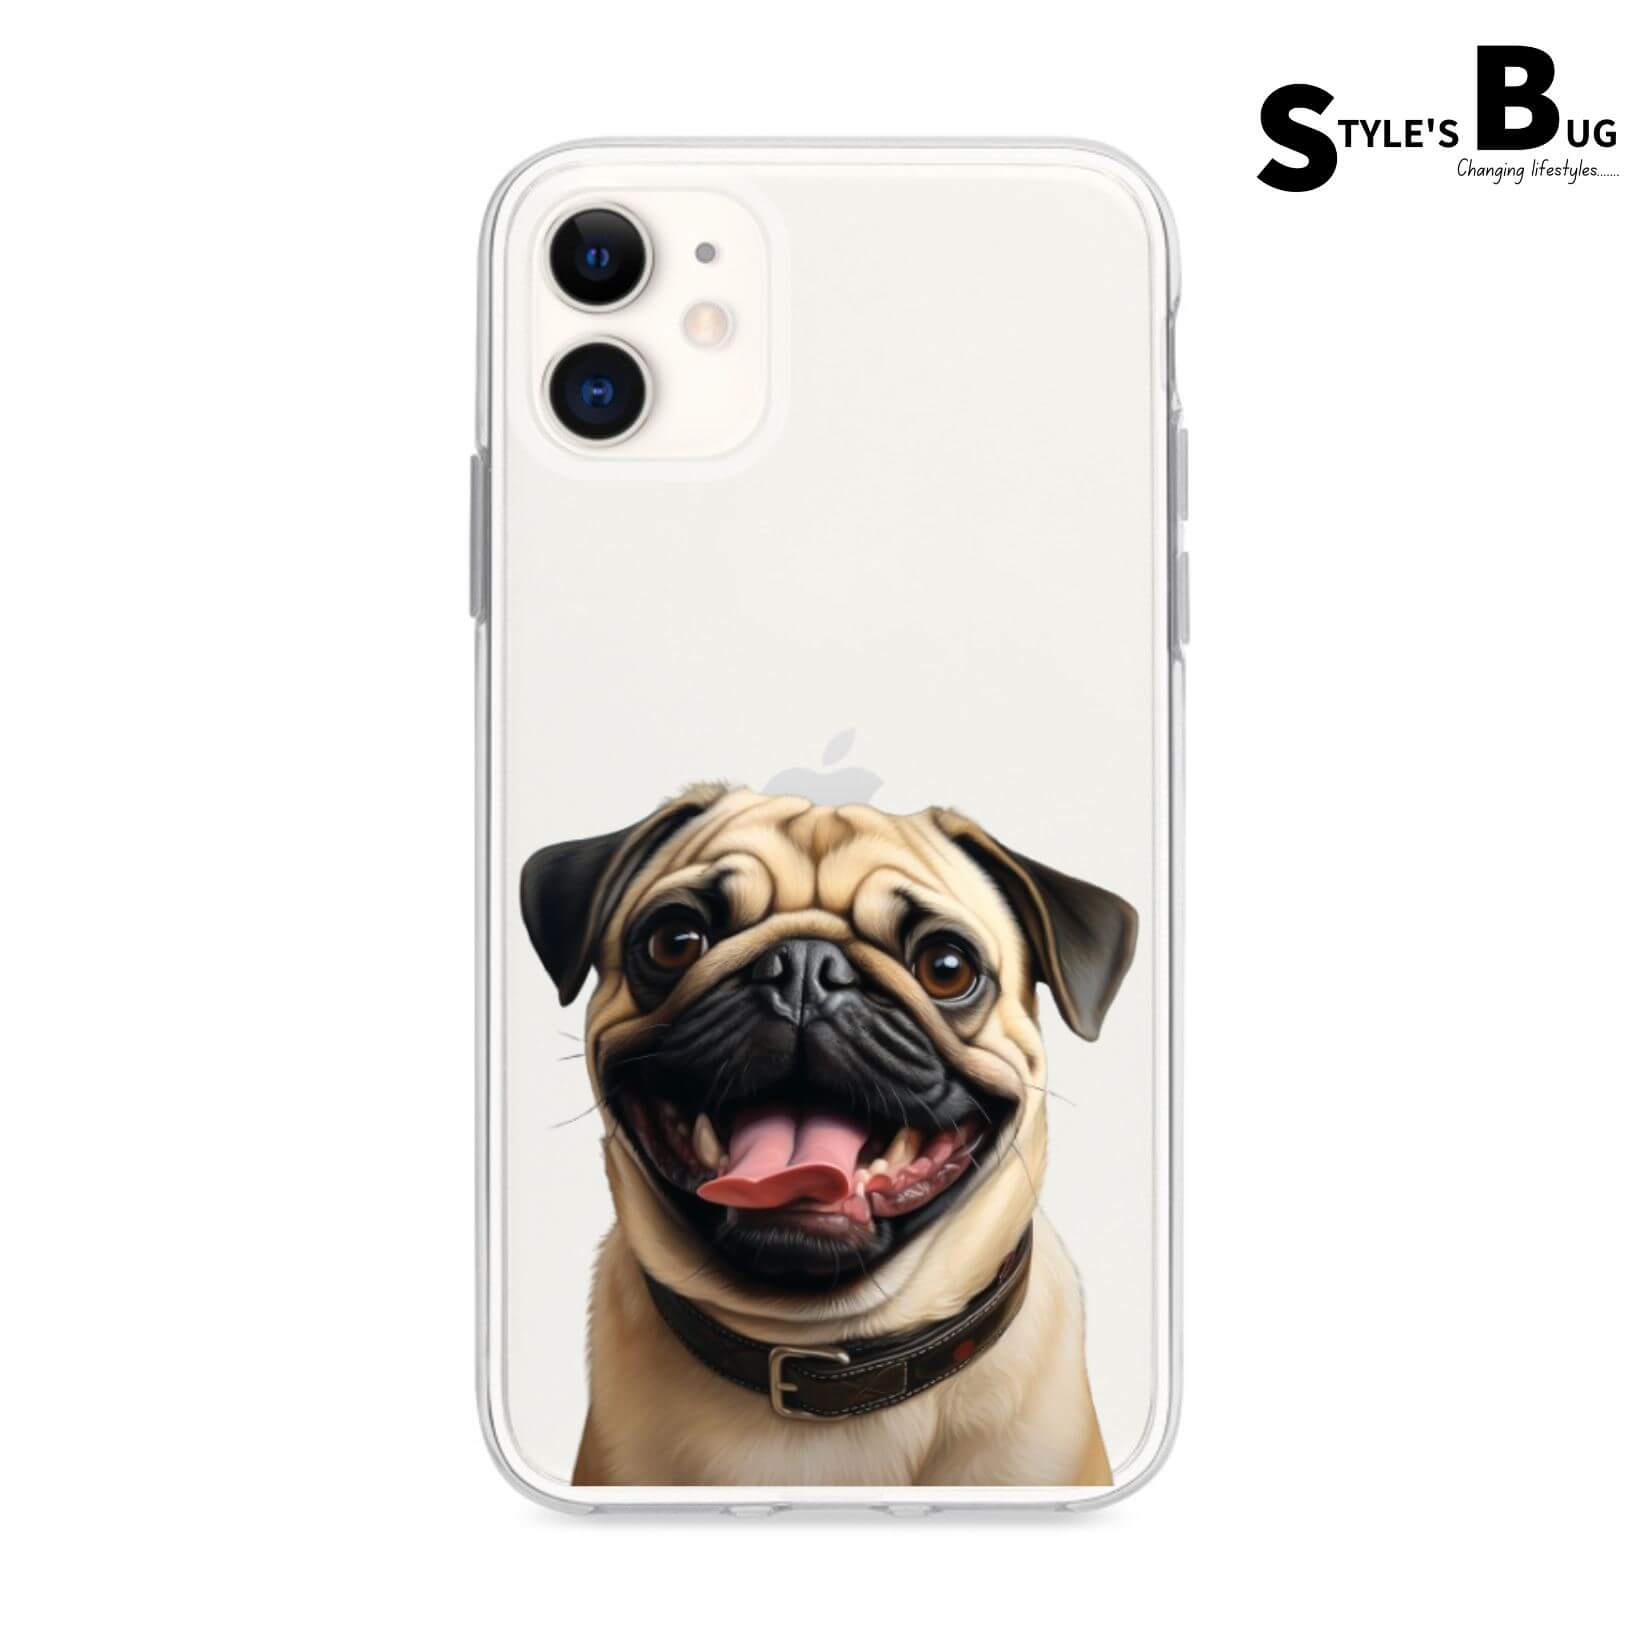 Smiling Dog phone cases from Style's Bug (UV printed) - Style's Bug Pug